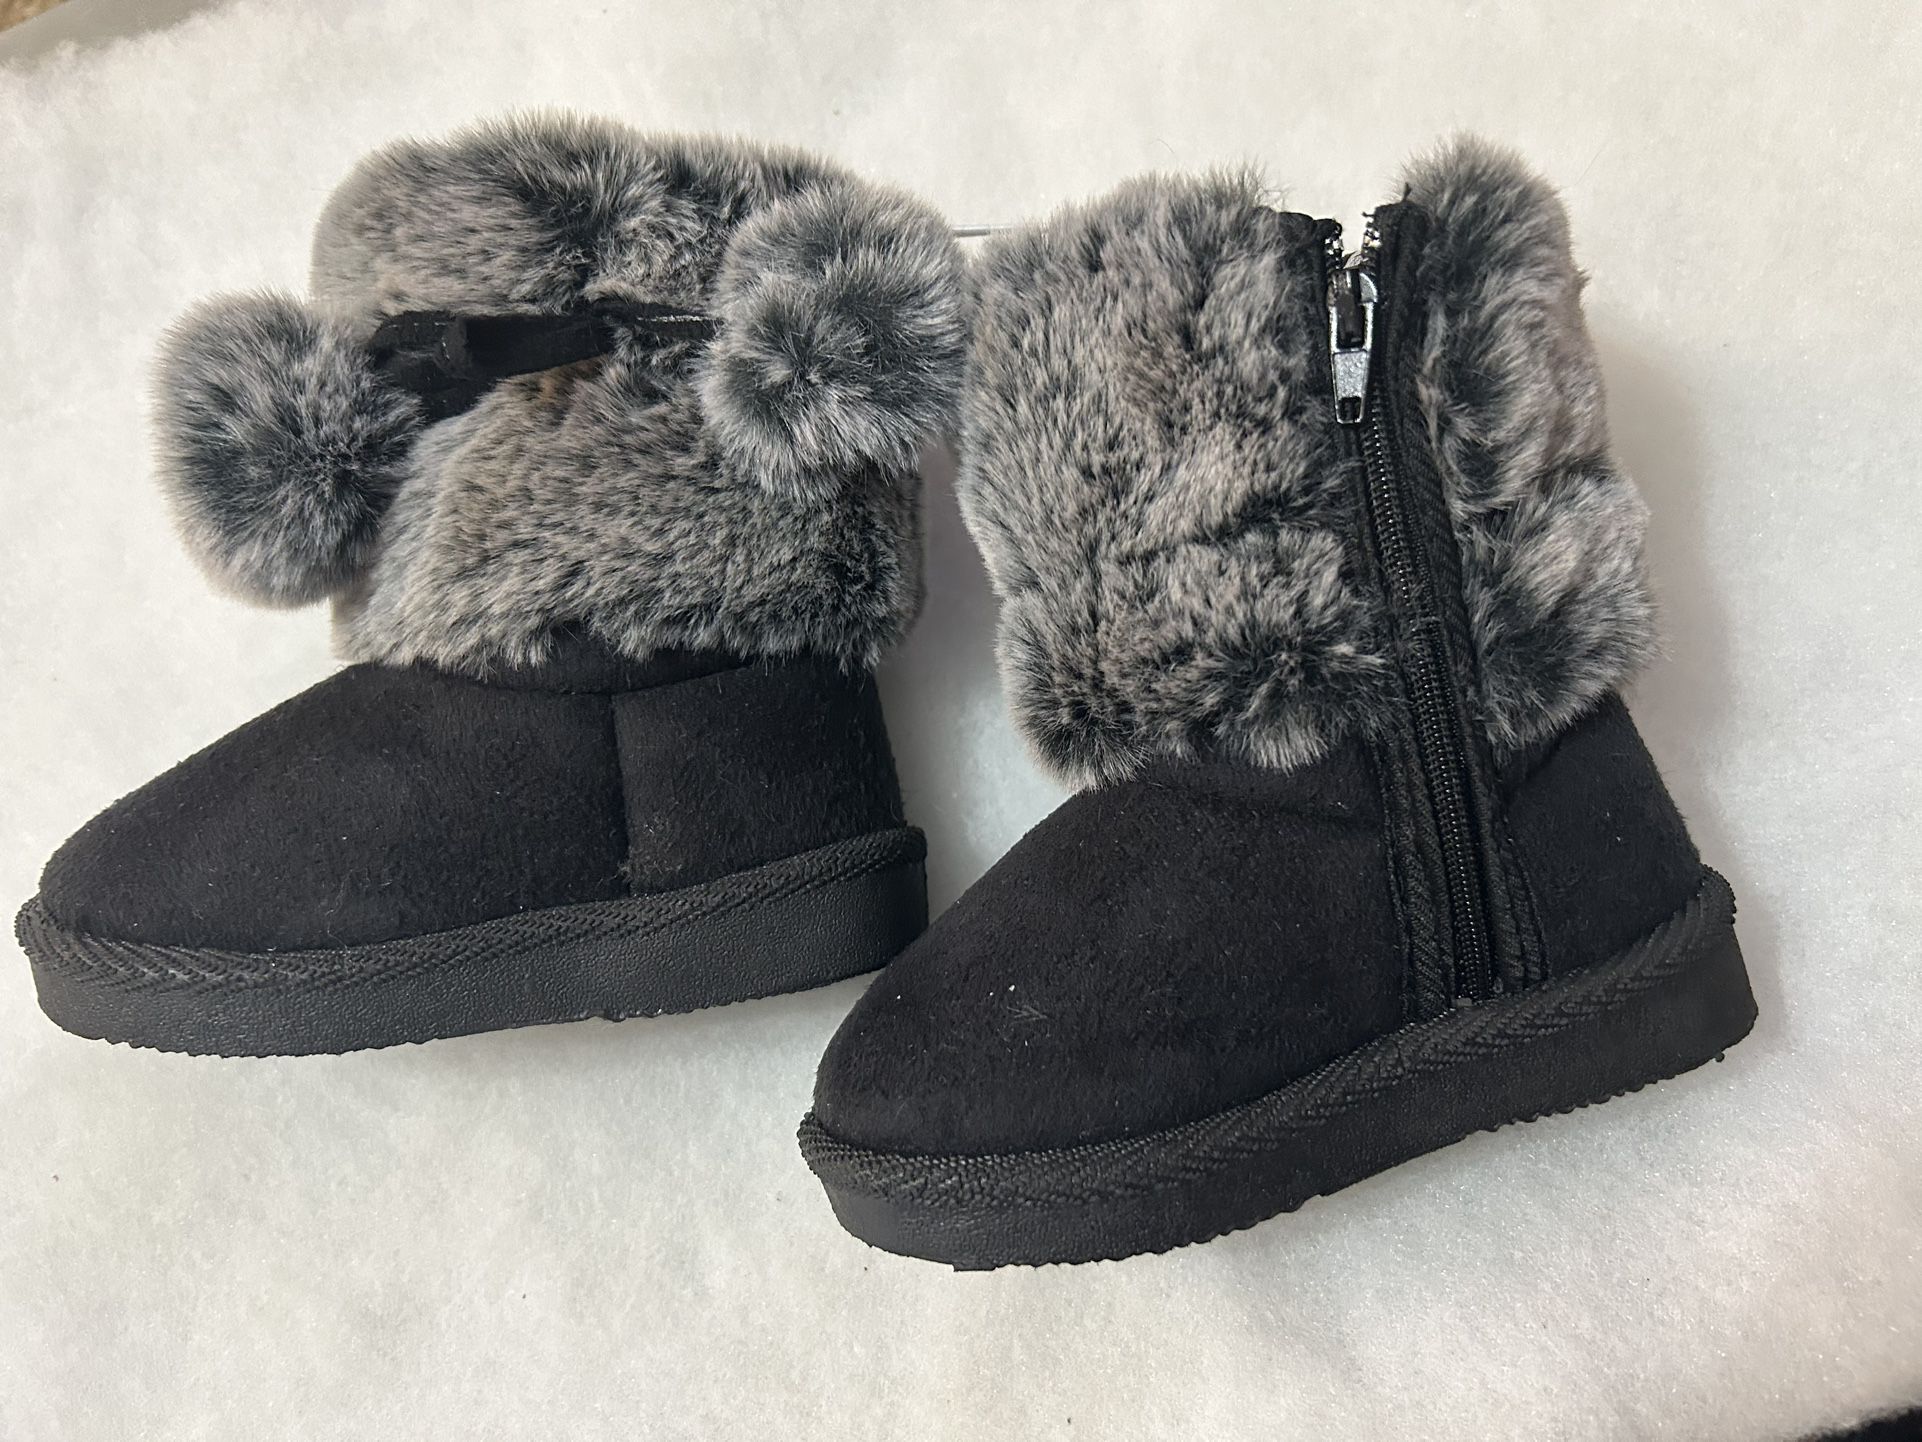 Brand new Toddlers size 4 black/gray fur top Boots